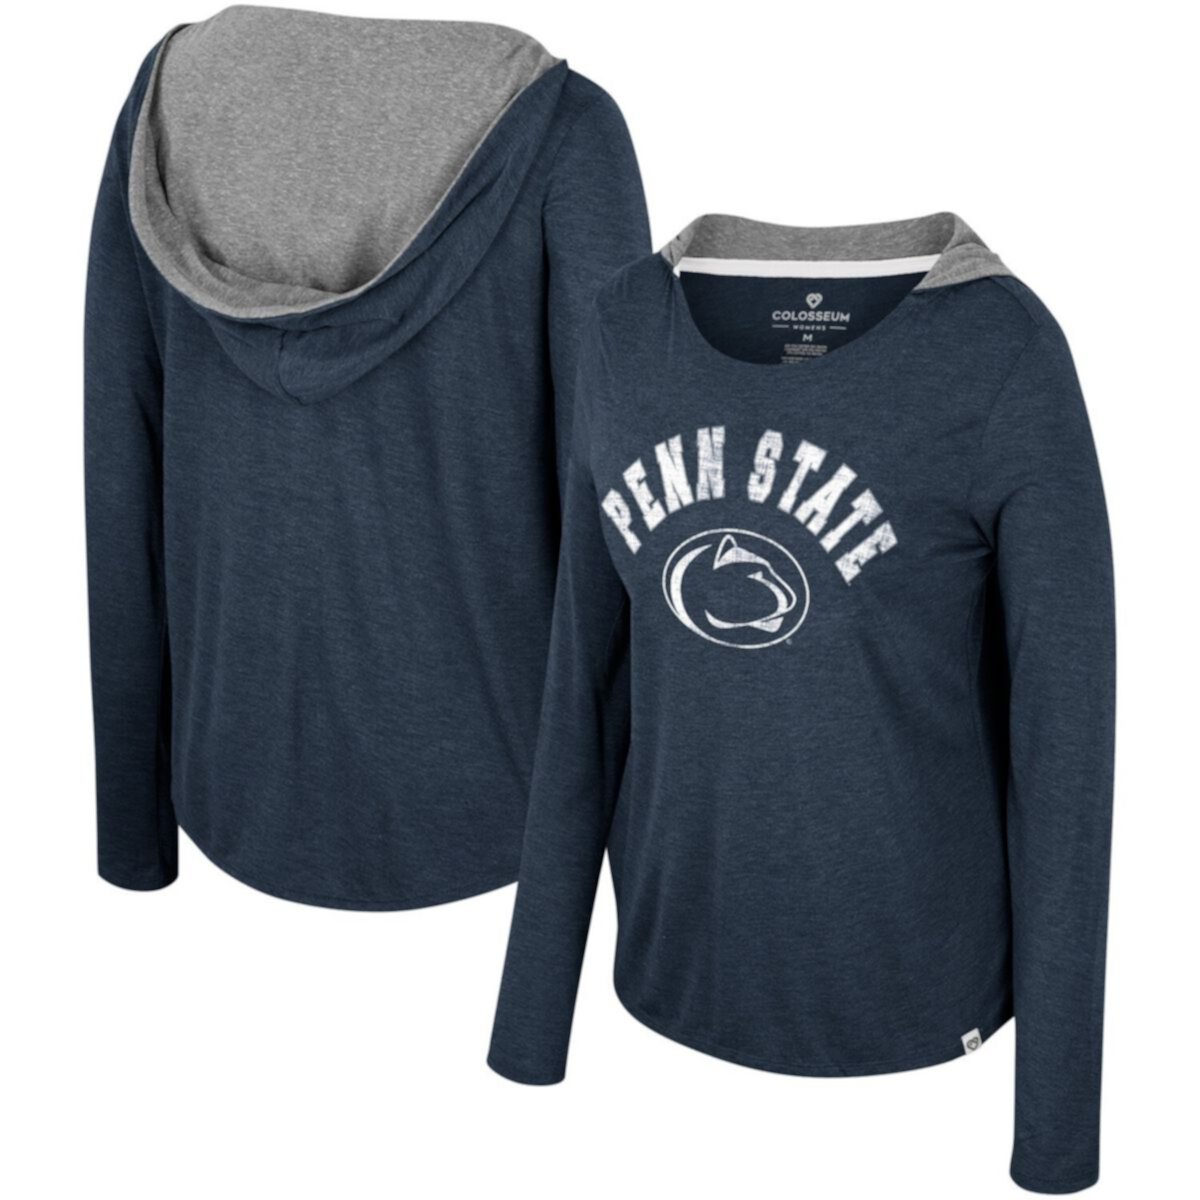 Women's Colosseum  Navy Penn State Nittany Lions Distressed Heather Long Sleeve Hoodie T-Shirt Colosseum